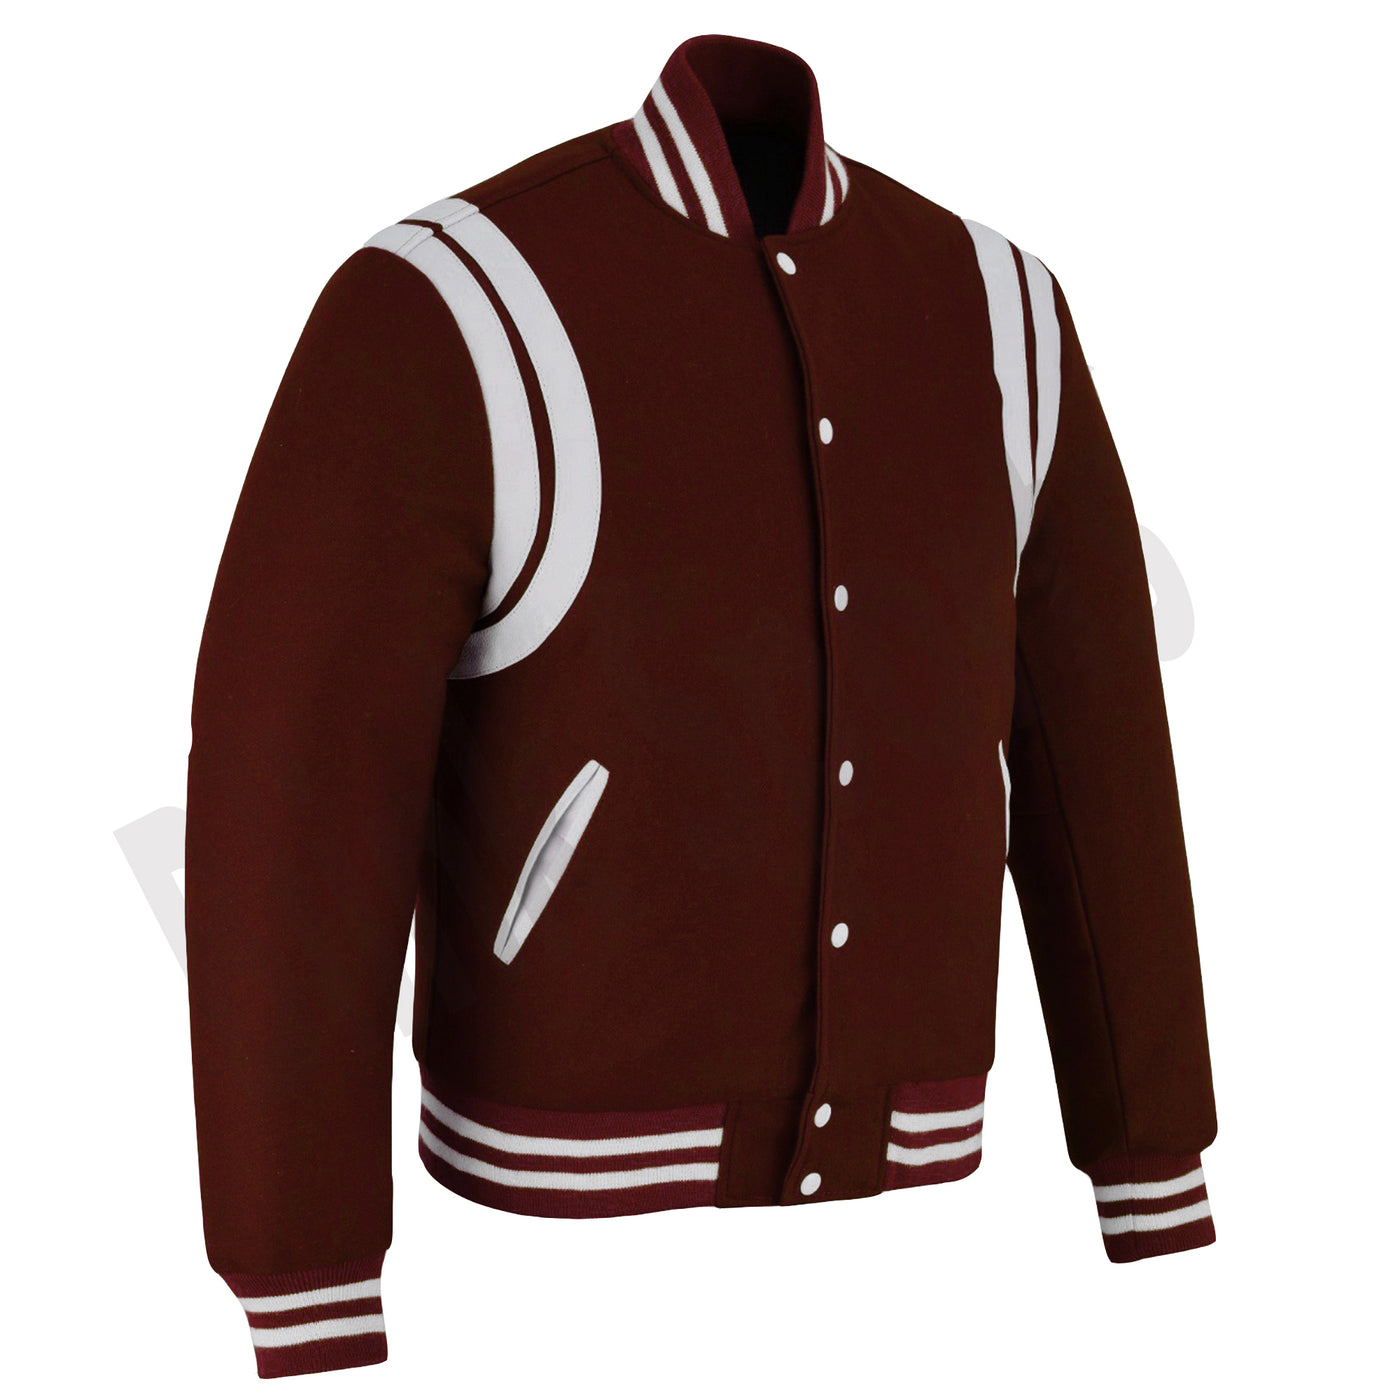 Classic Varisty Letterman Baseball College Jacket Maroon Wool with White Double Leather Strip